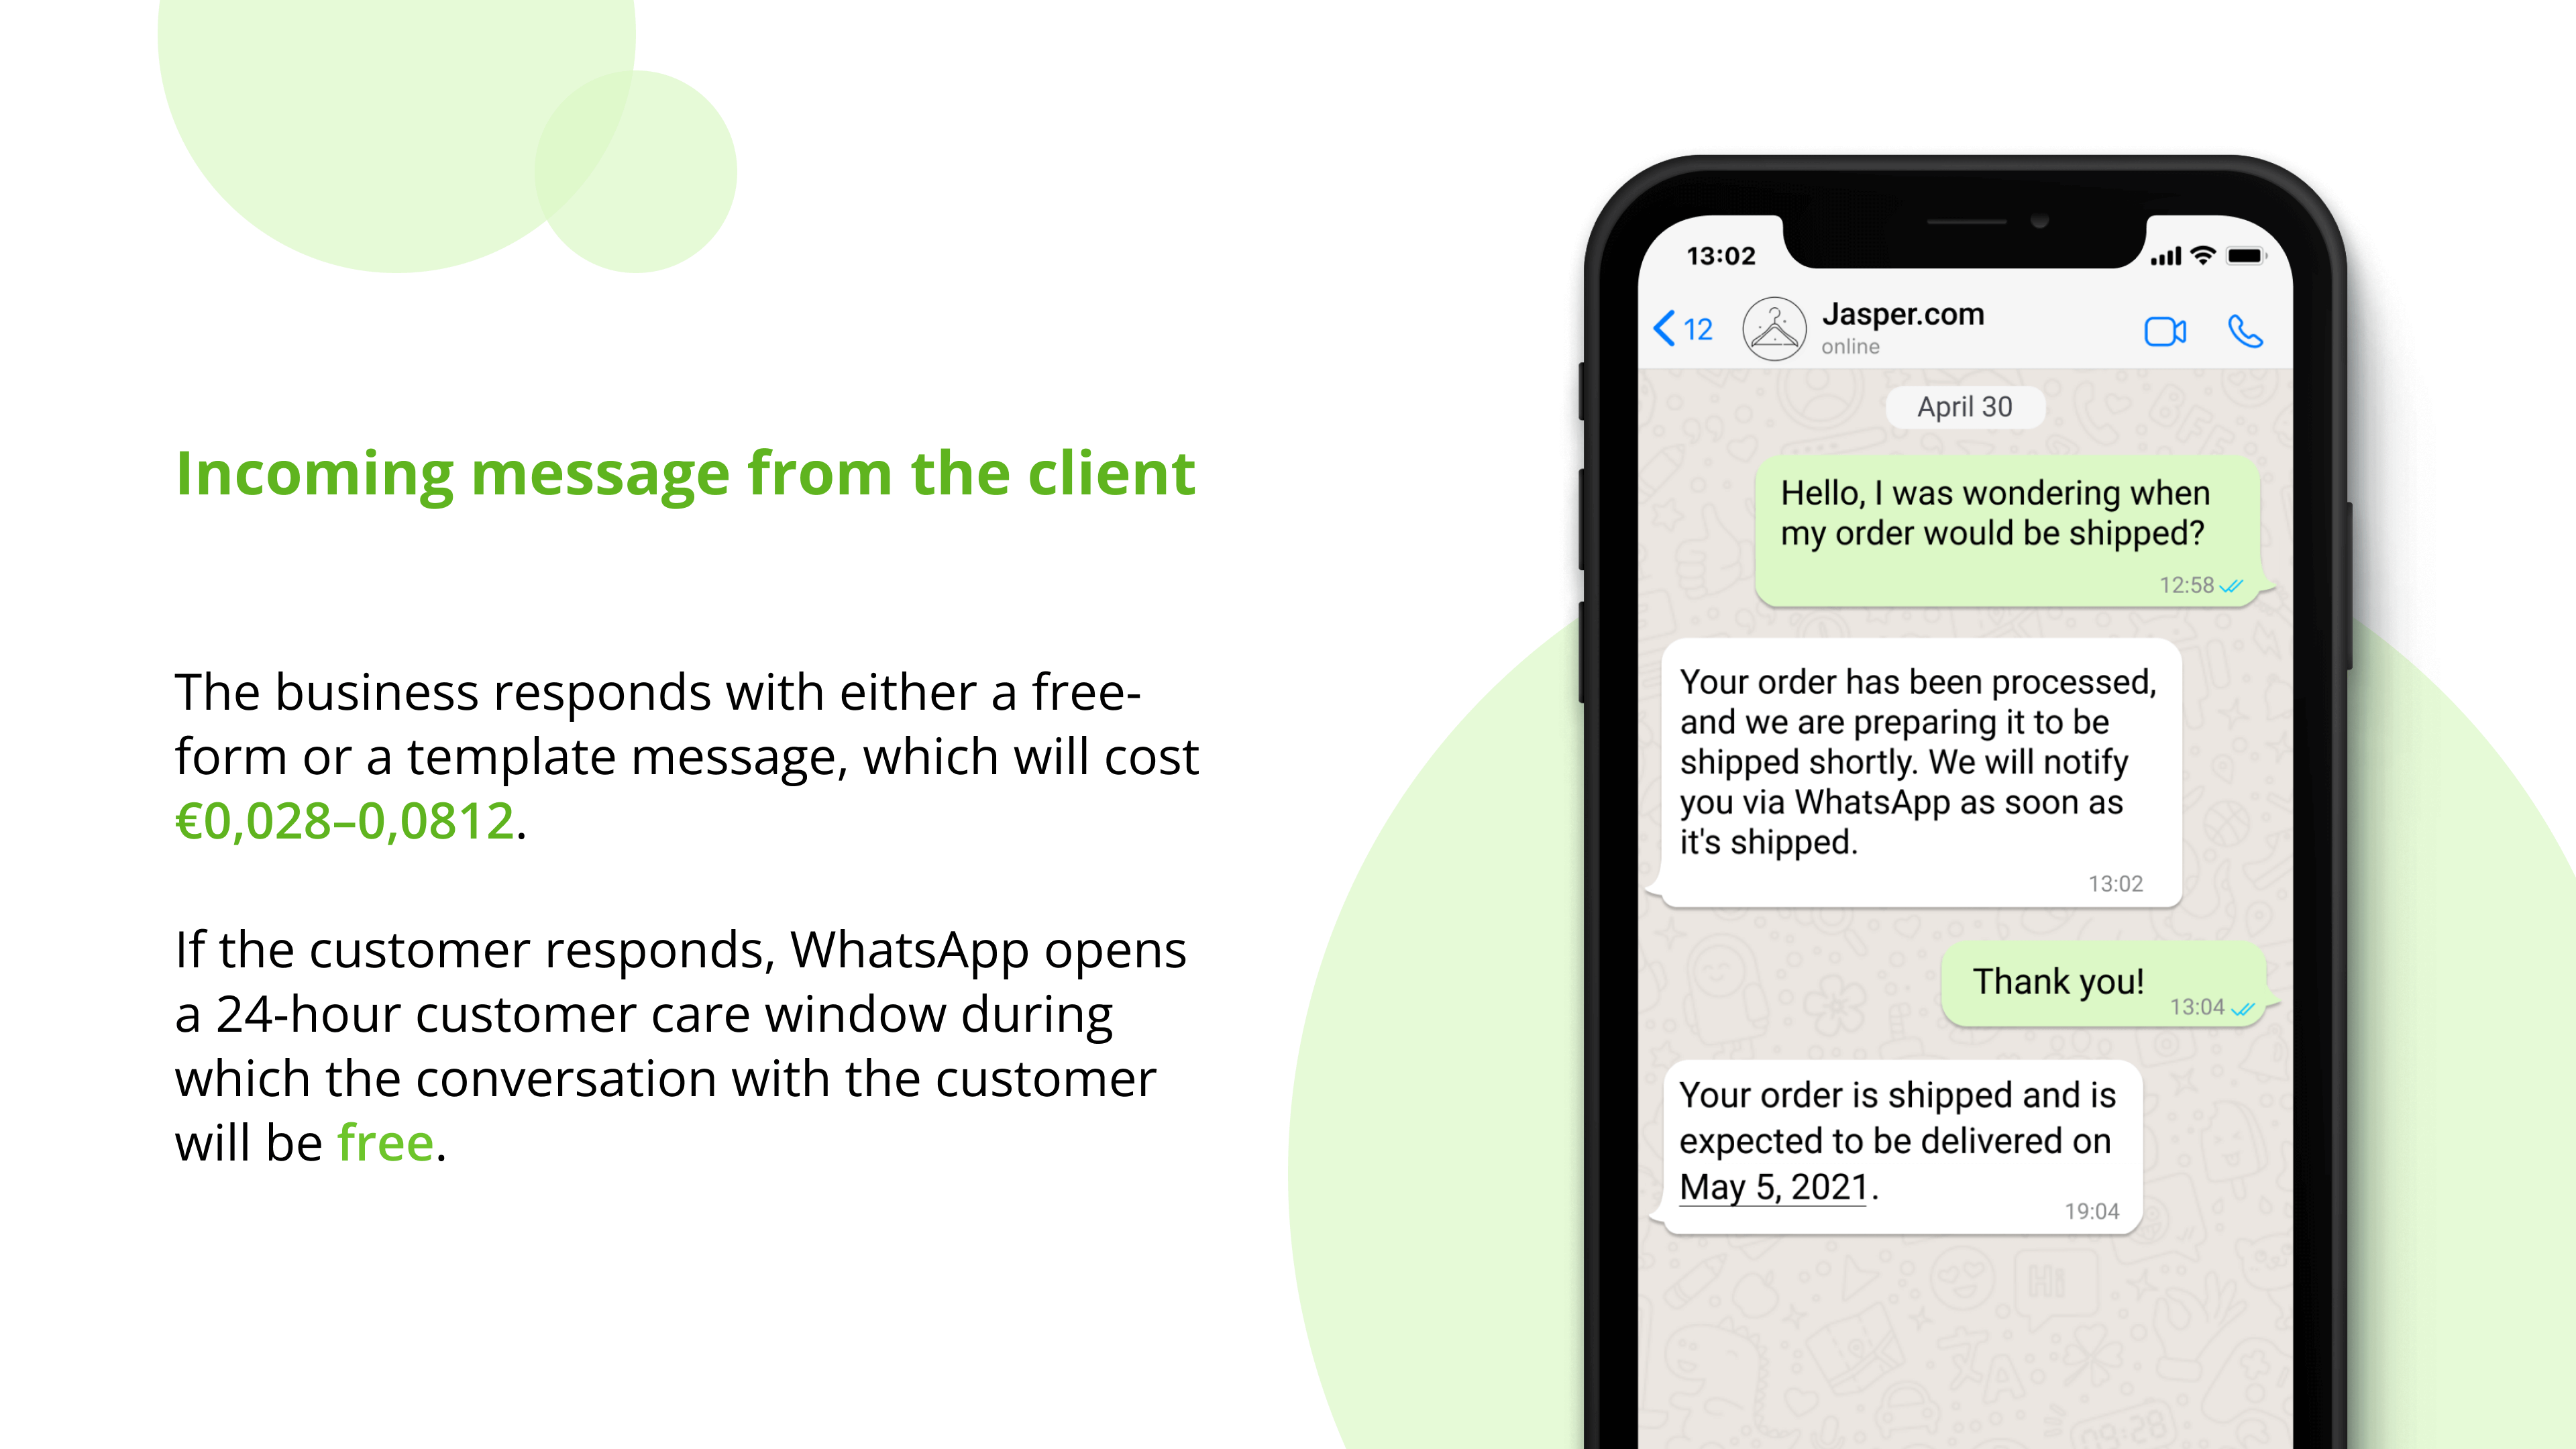 WhatsApp session: Incoming message from the client